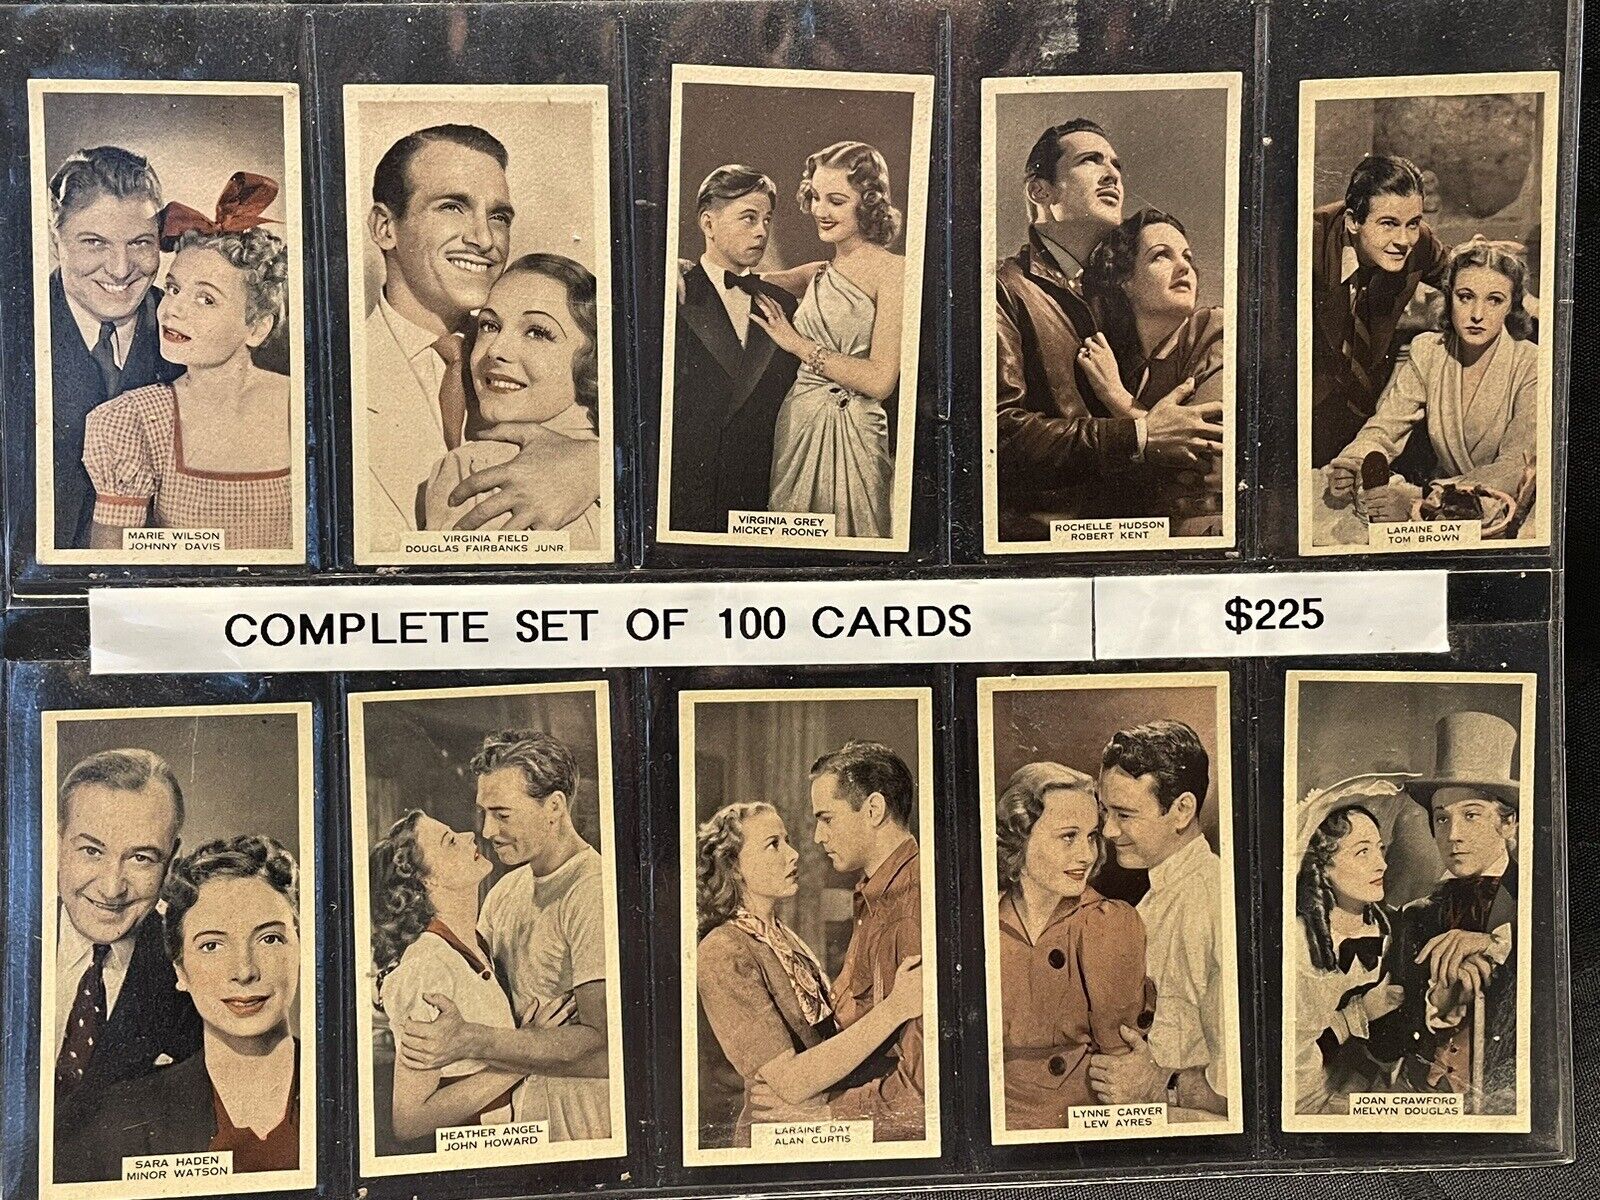 WIX (A & M) - FILM FAVOURITES, 3RD - FULL SET OF 100 CARDS (Excellent Condition)